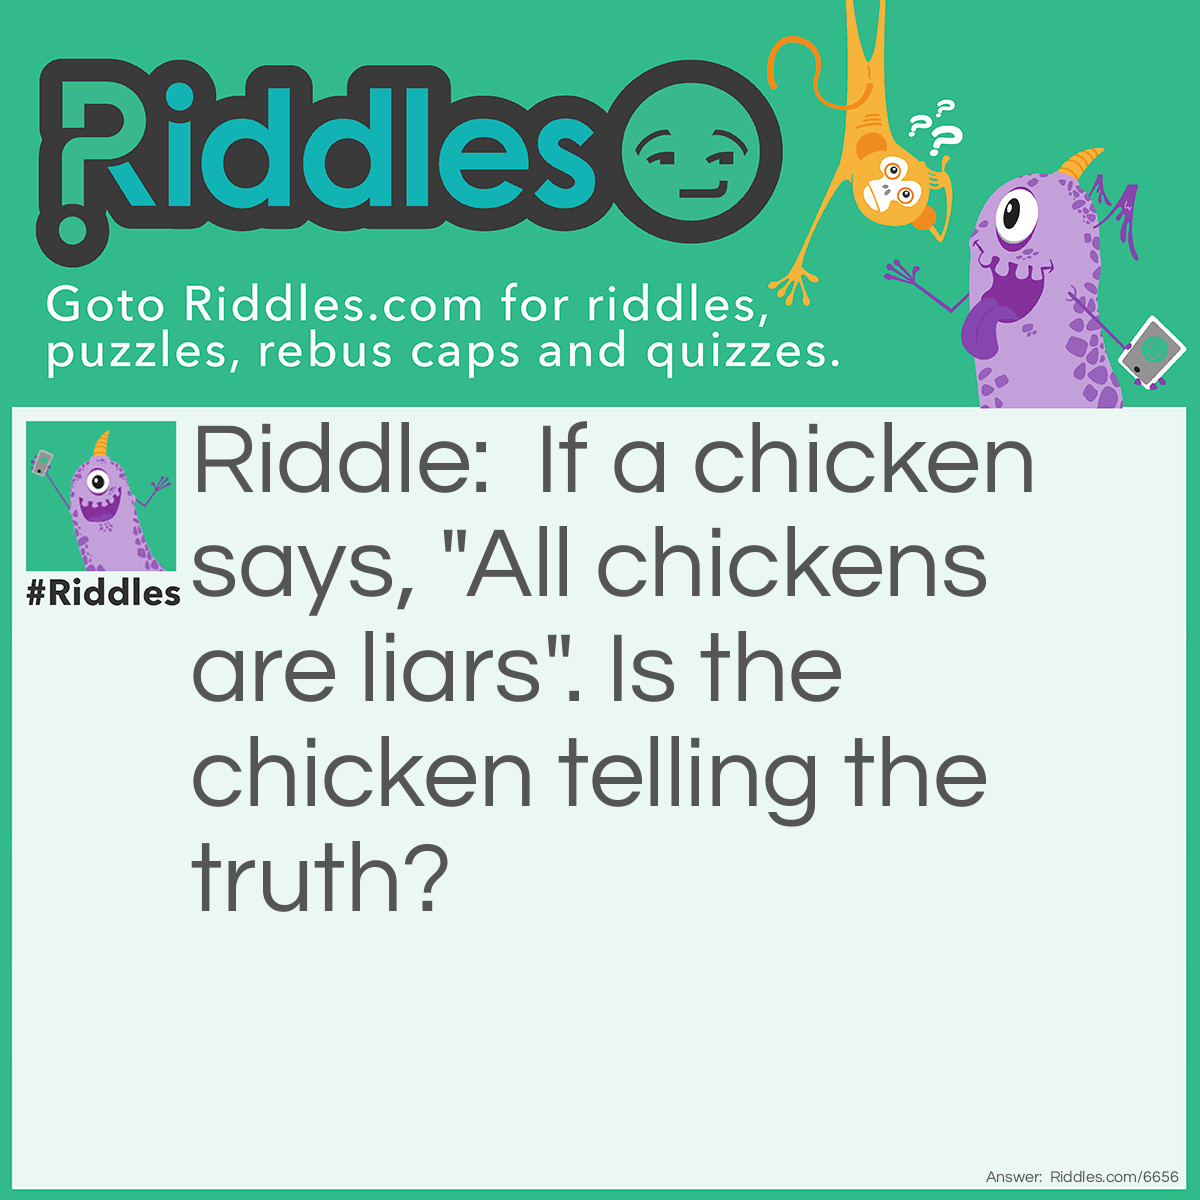 Riddle: If a chicken says, "All chickens are liars". Is the chicken telling the truth? Answer: Answer: Chickens cannot talk.